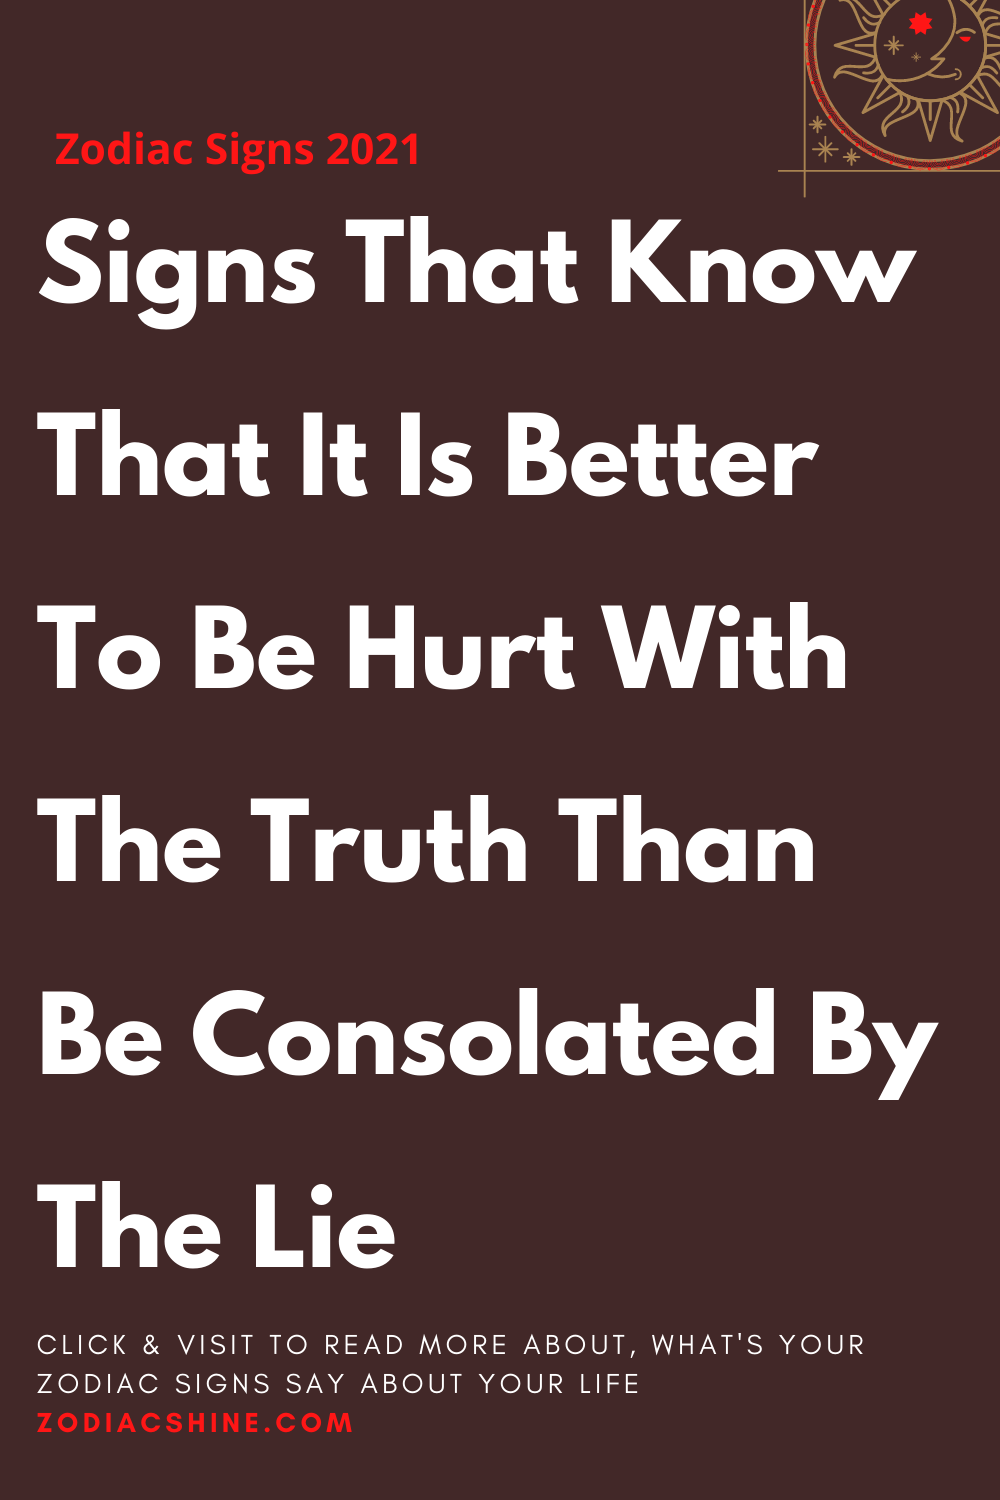 Signs That Know That It Is Better To Be Hurt With The Truth Than Be Consolated By The Lie